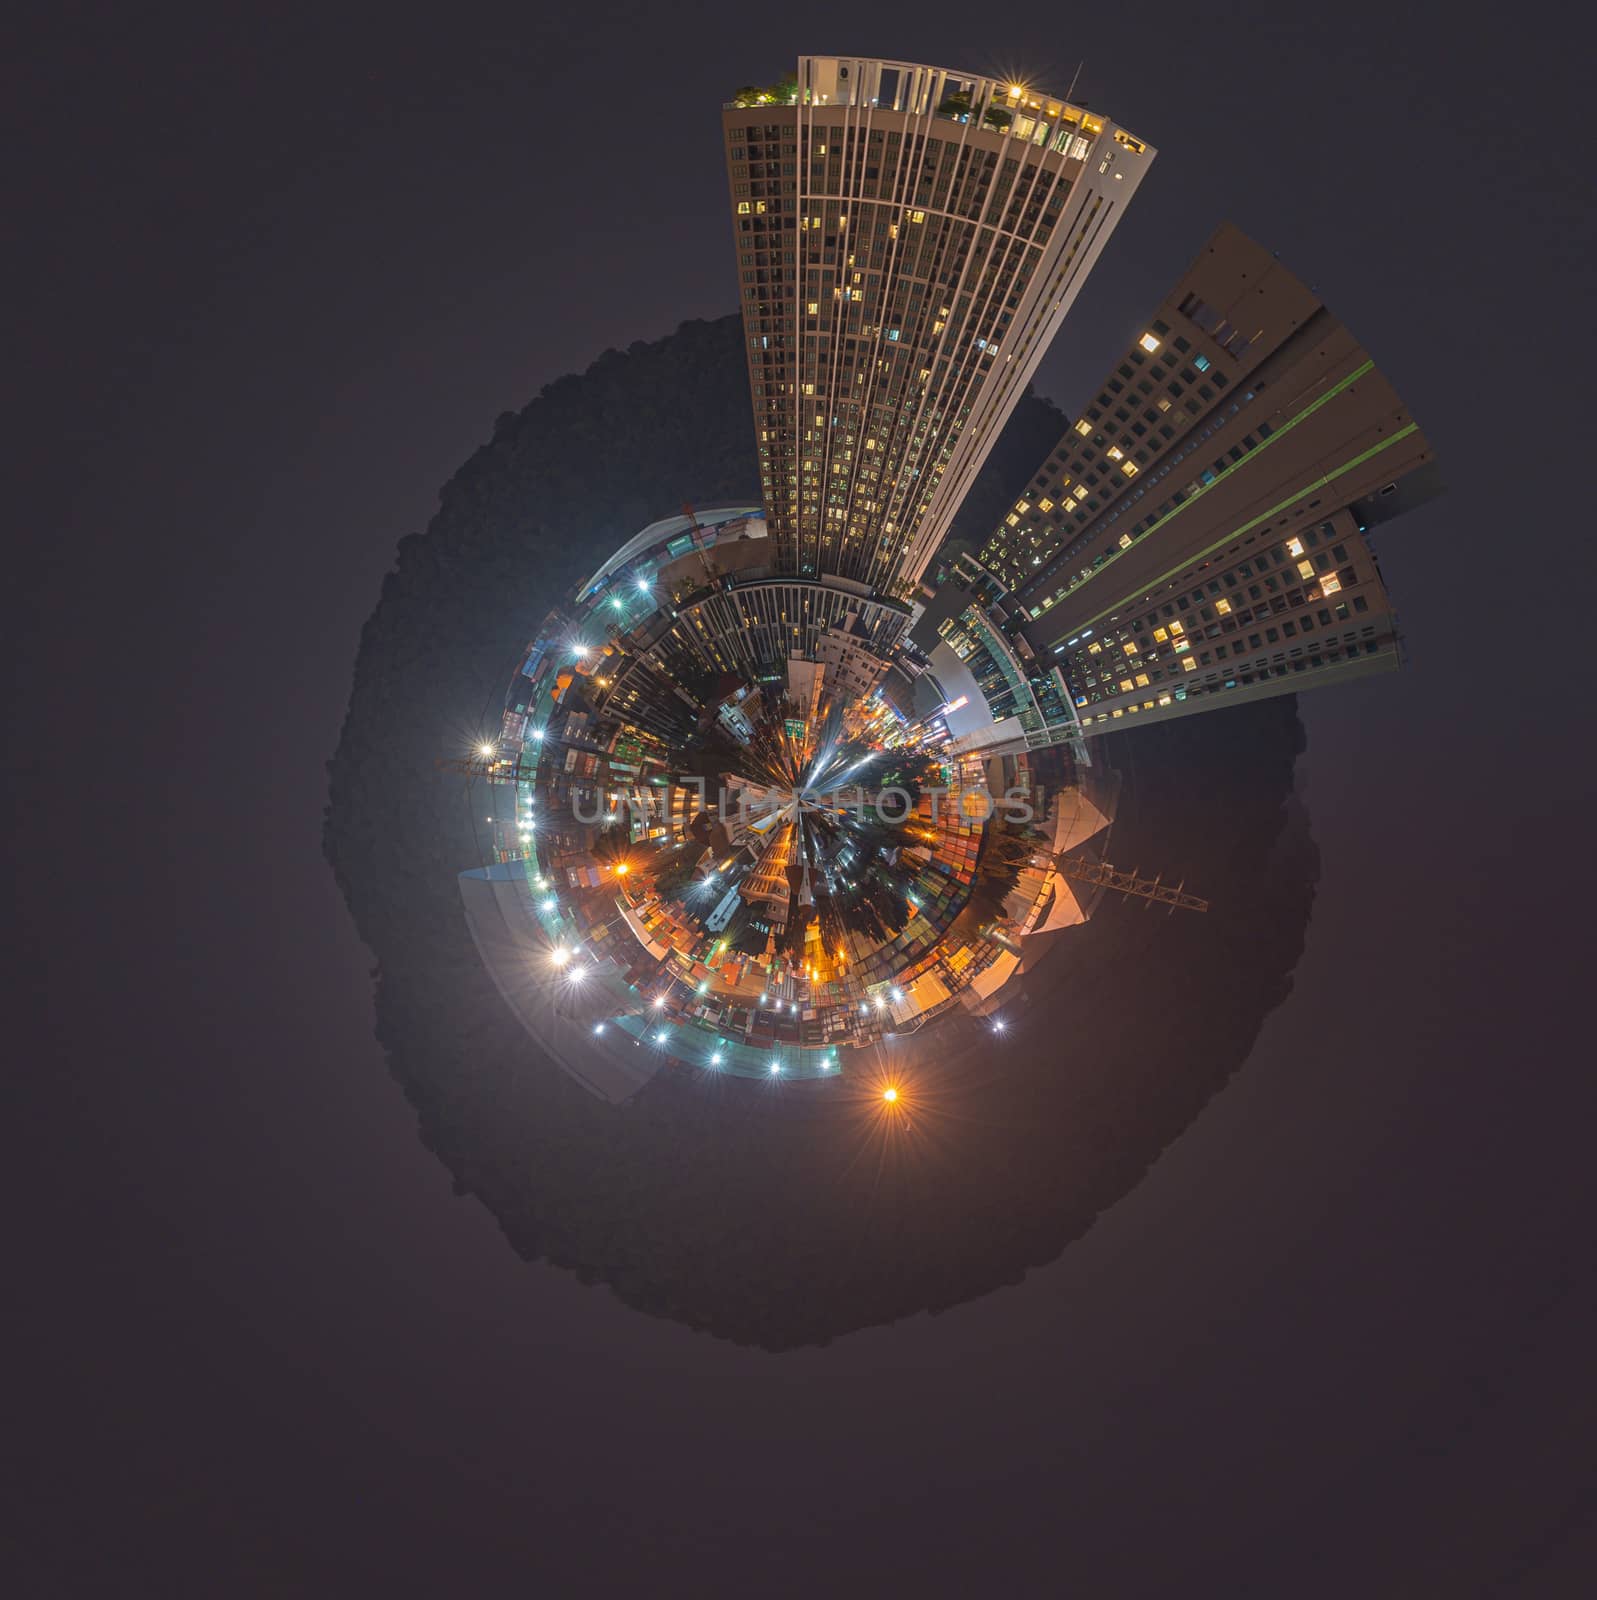 Aerial 360 degrees Panorama of aerial view of small city concept at night by peerapixs